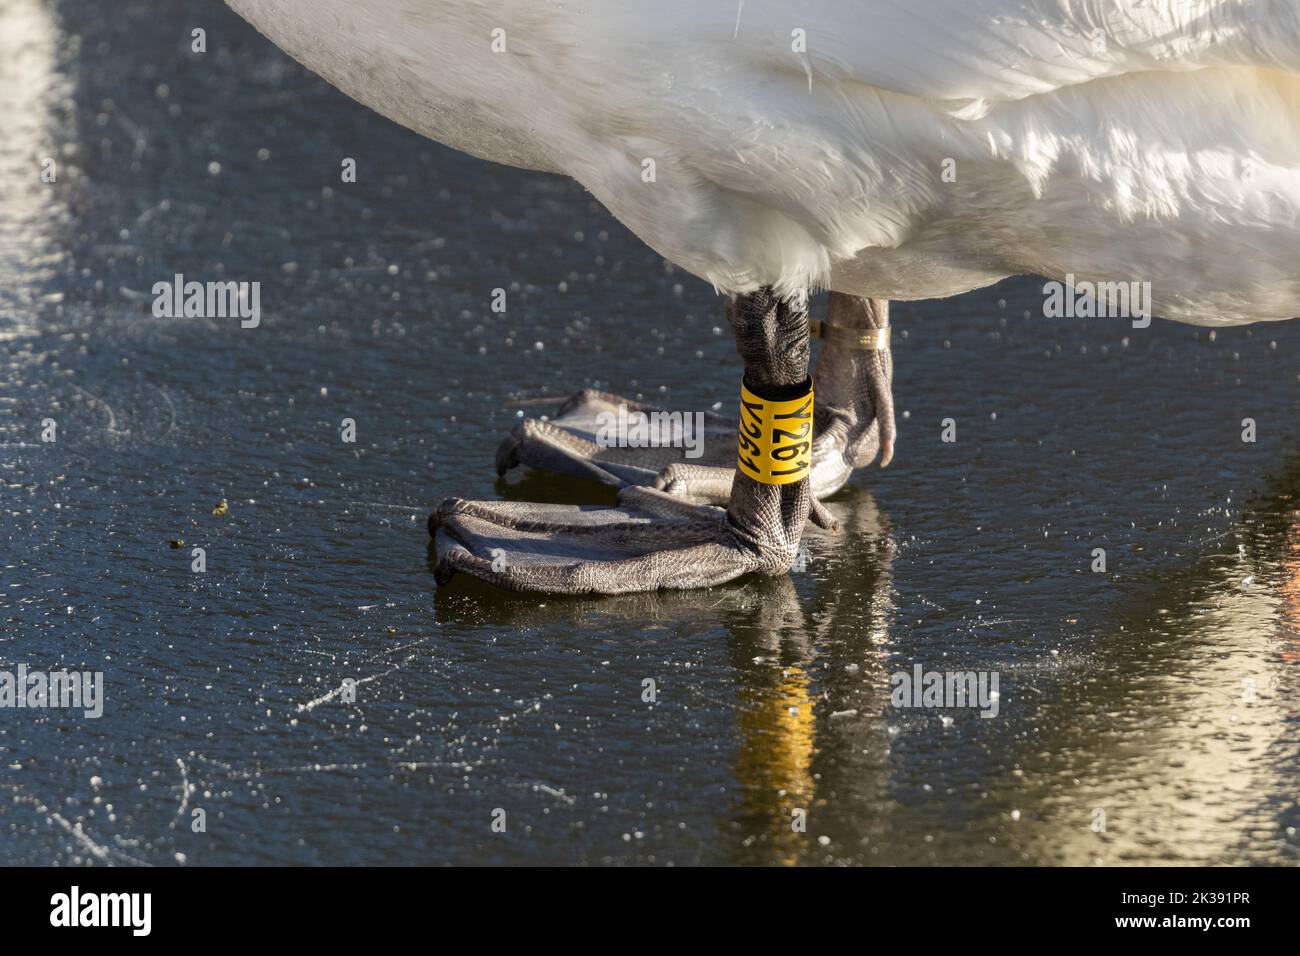 A mute swan showing a plastic, yellow identity ring on it's leg. Stock Photo